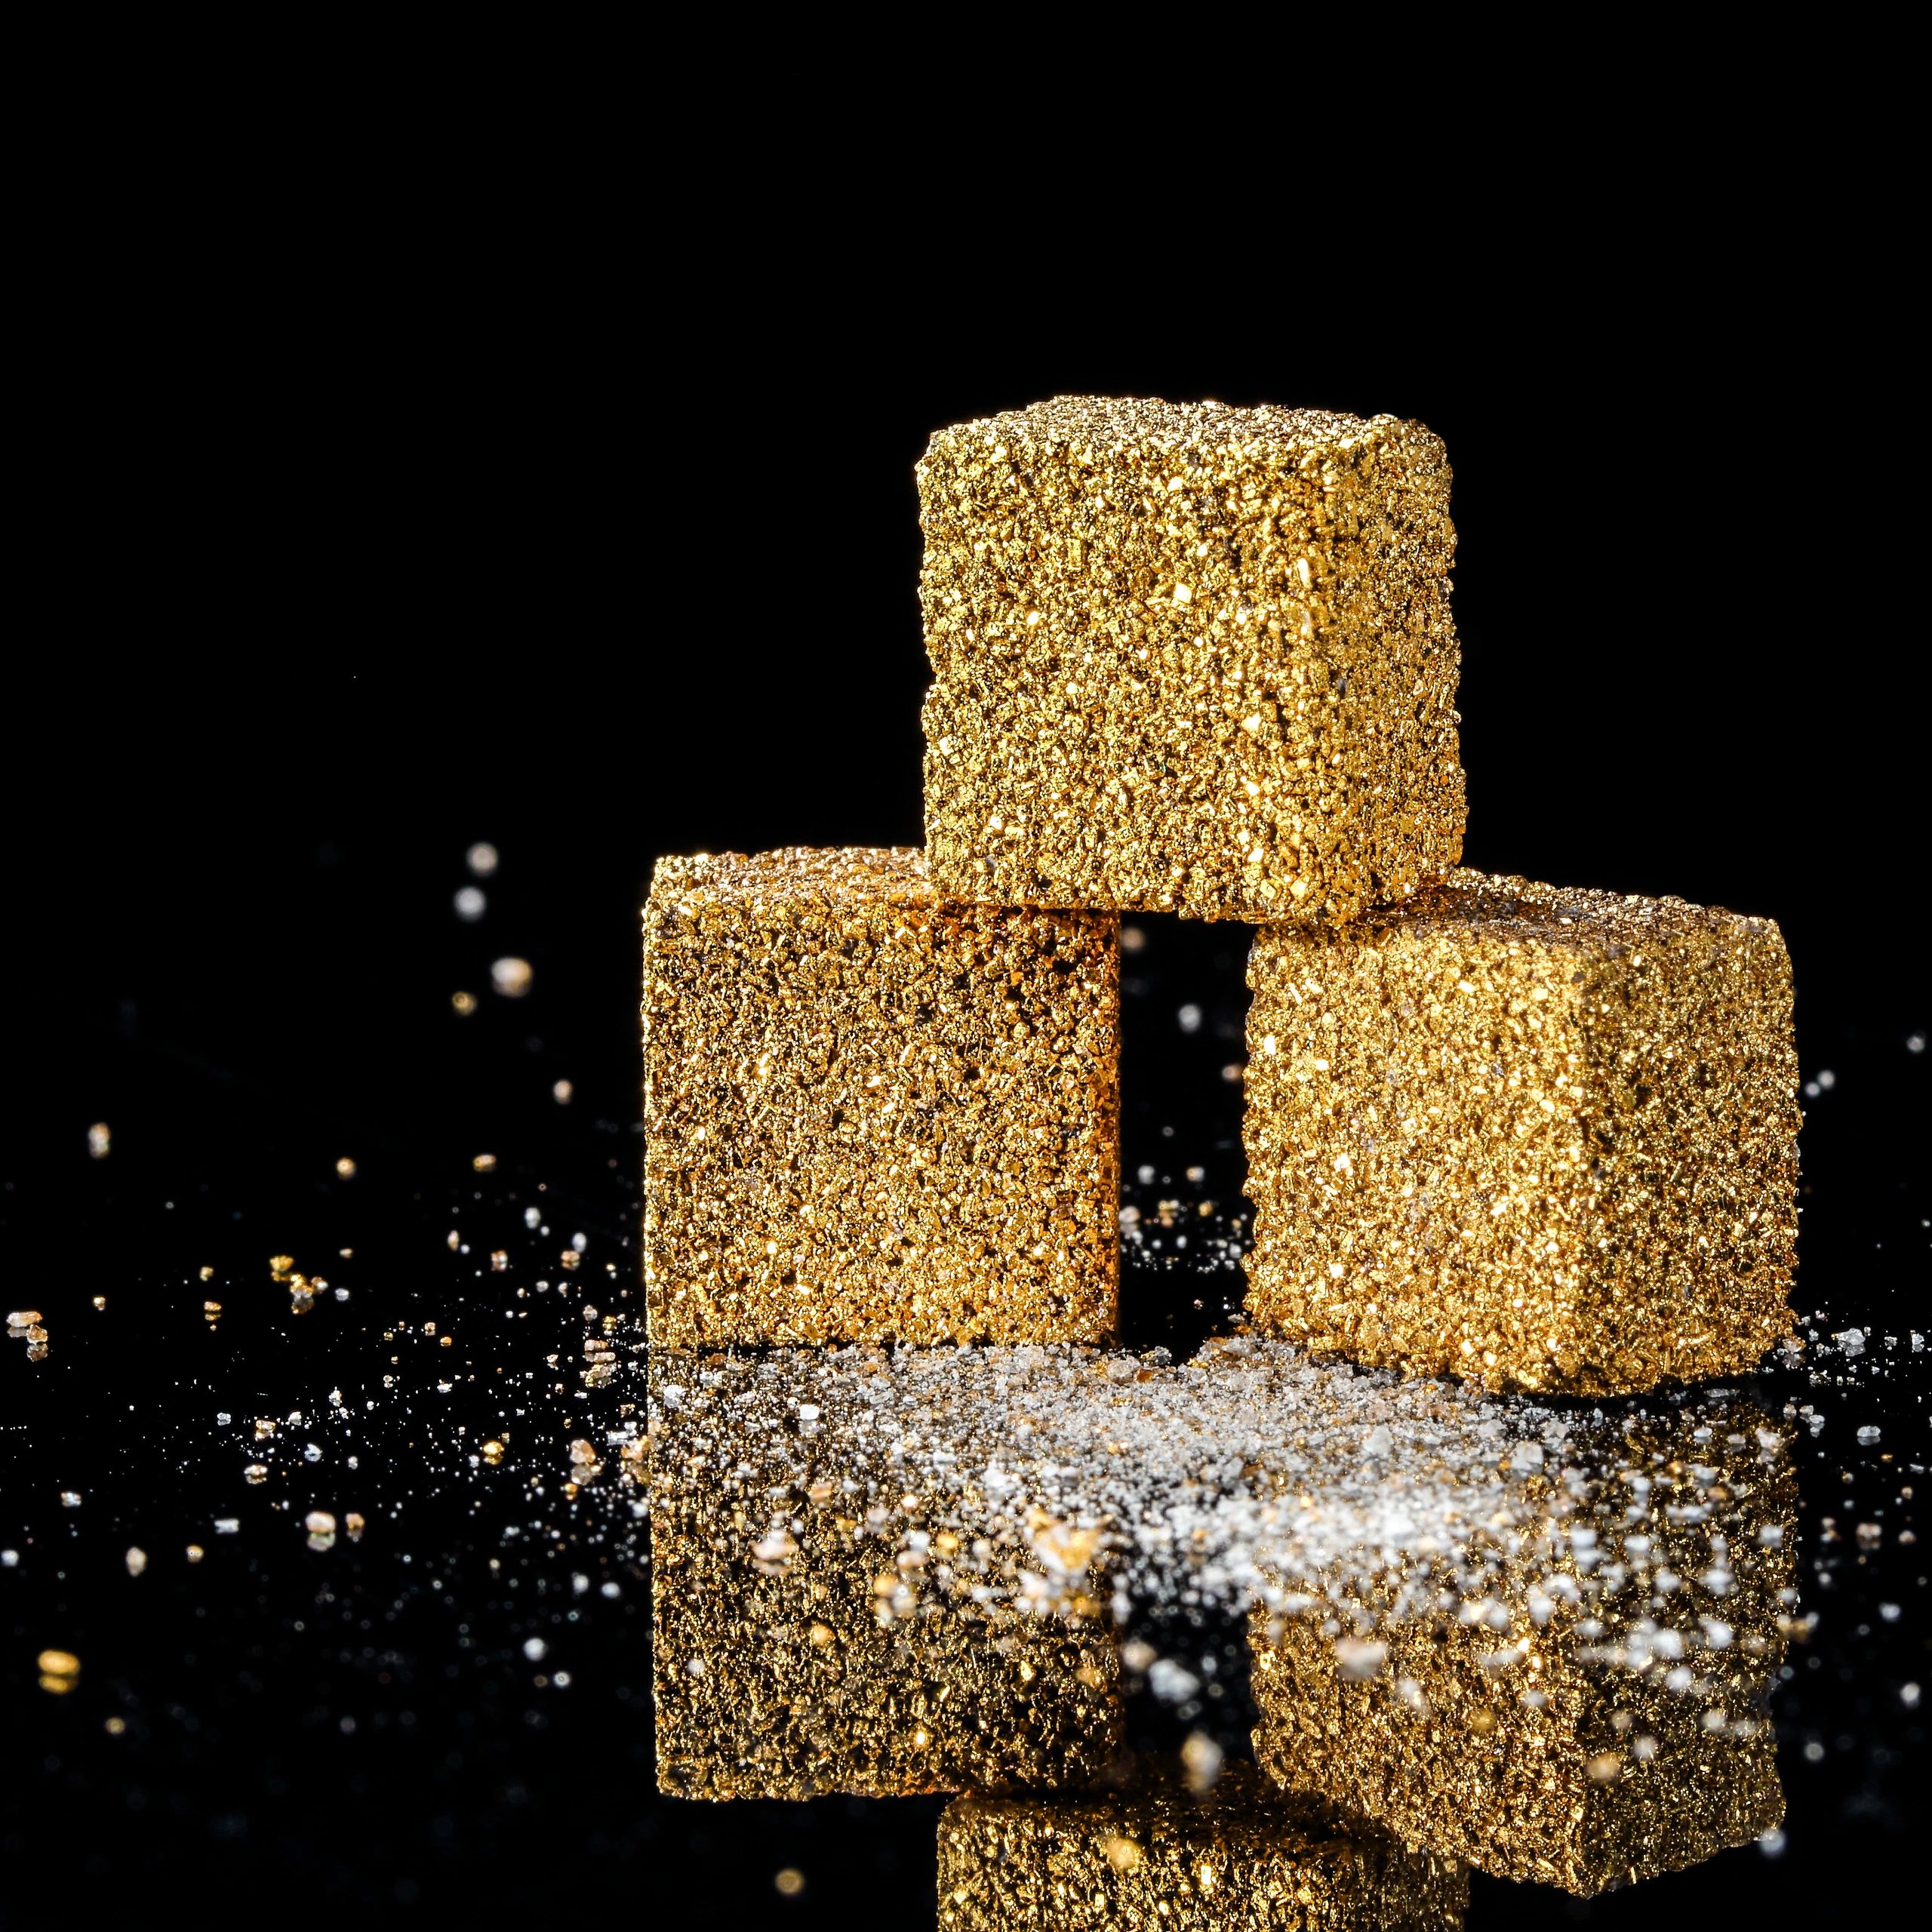 On the photo you can see 3 gold plated and edible GOLD SUGAR sugar cubes